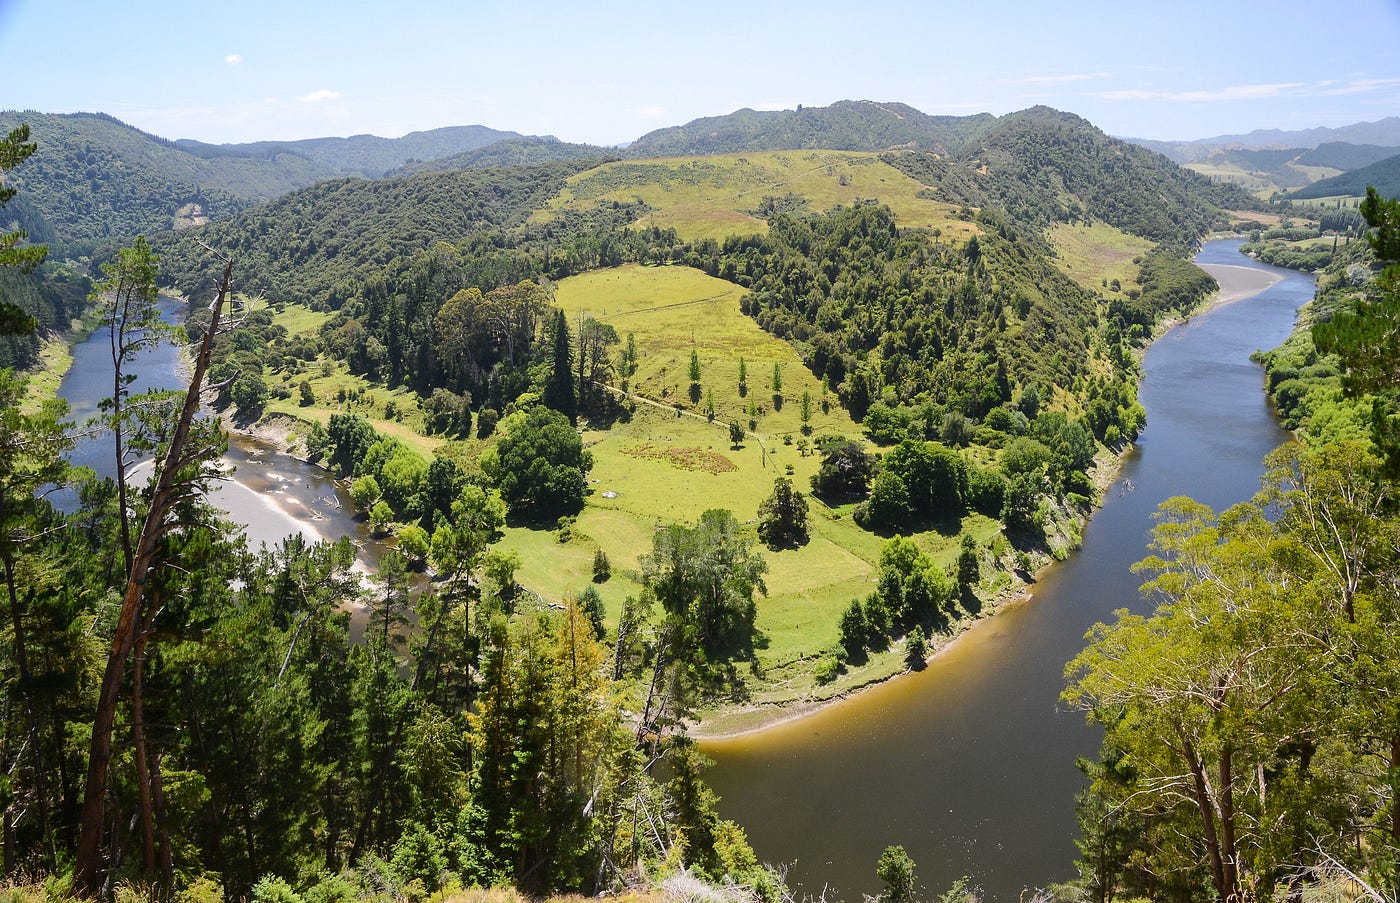 A photo of the Whanganui River in New Zealand.